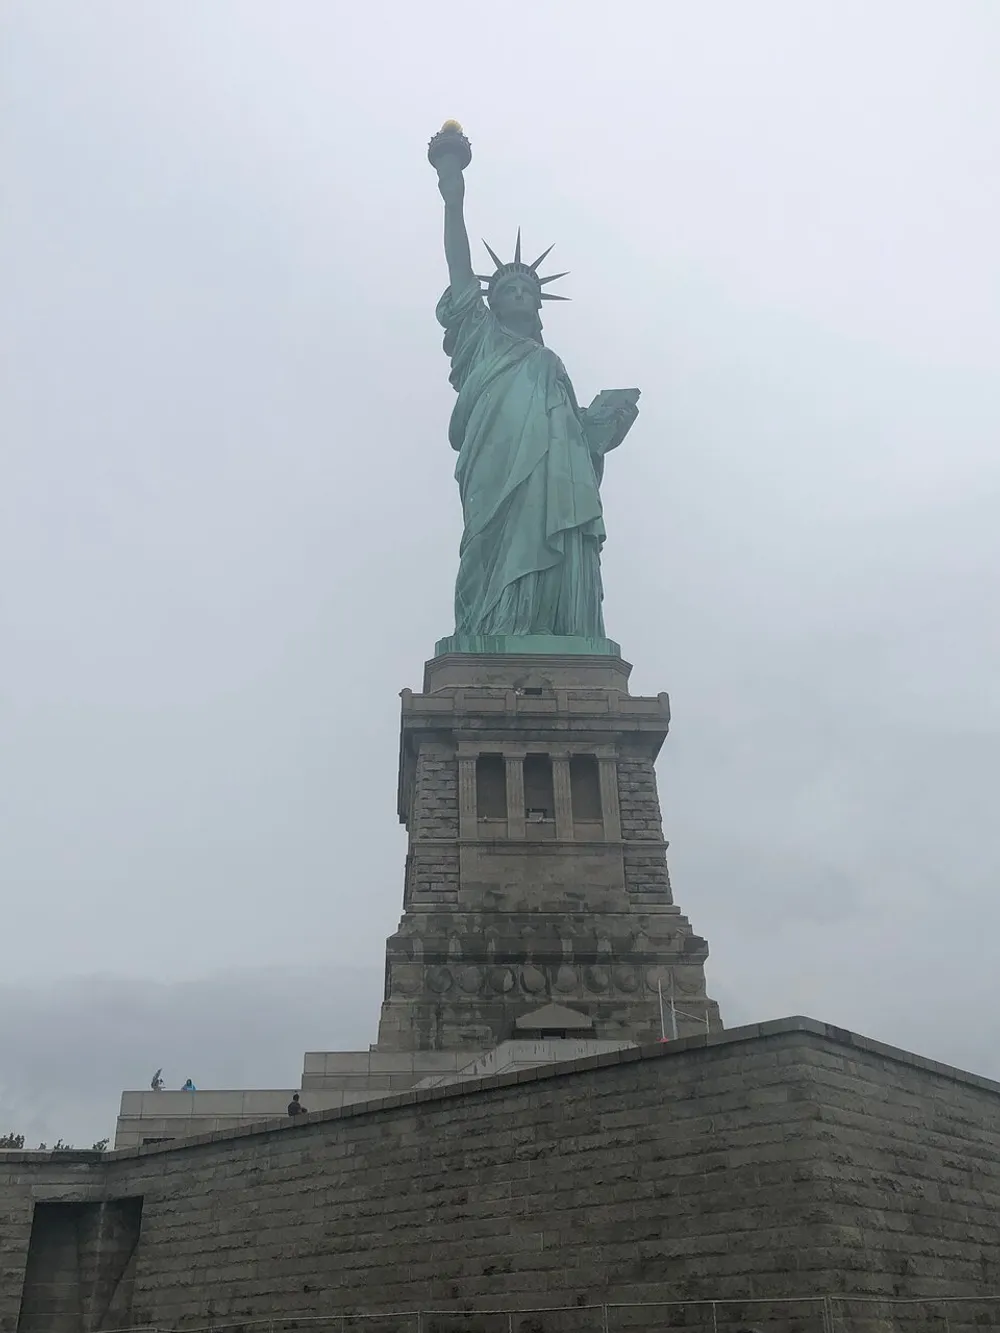 The image shows the Statue of Liberty standing tall under an overcast sky